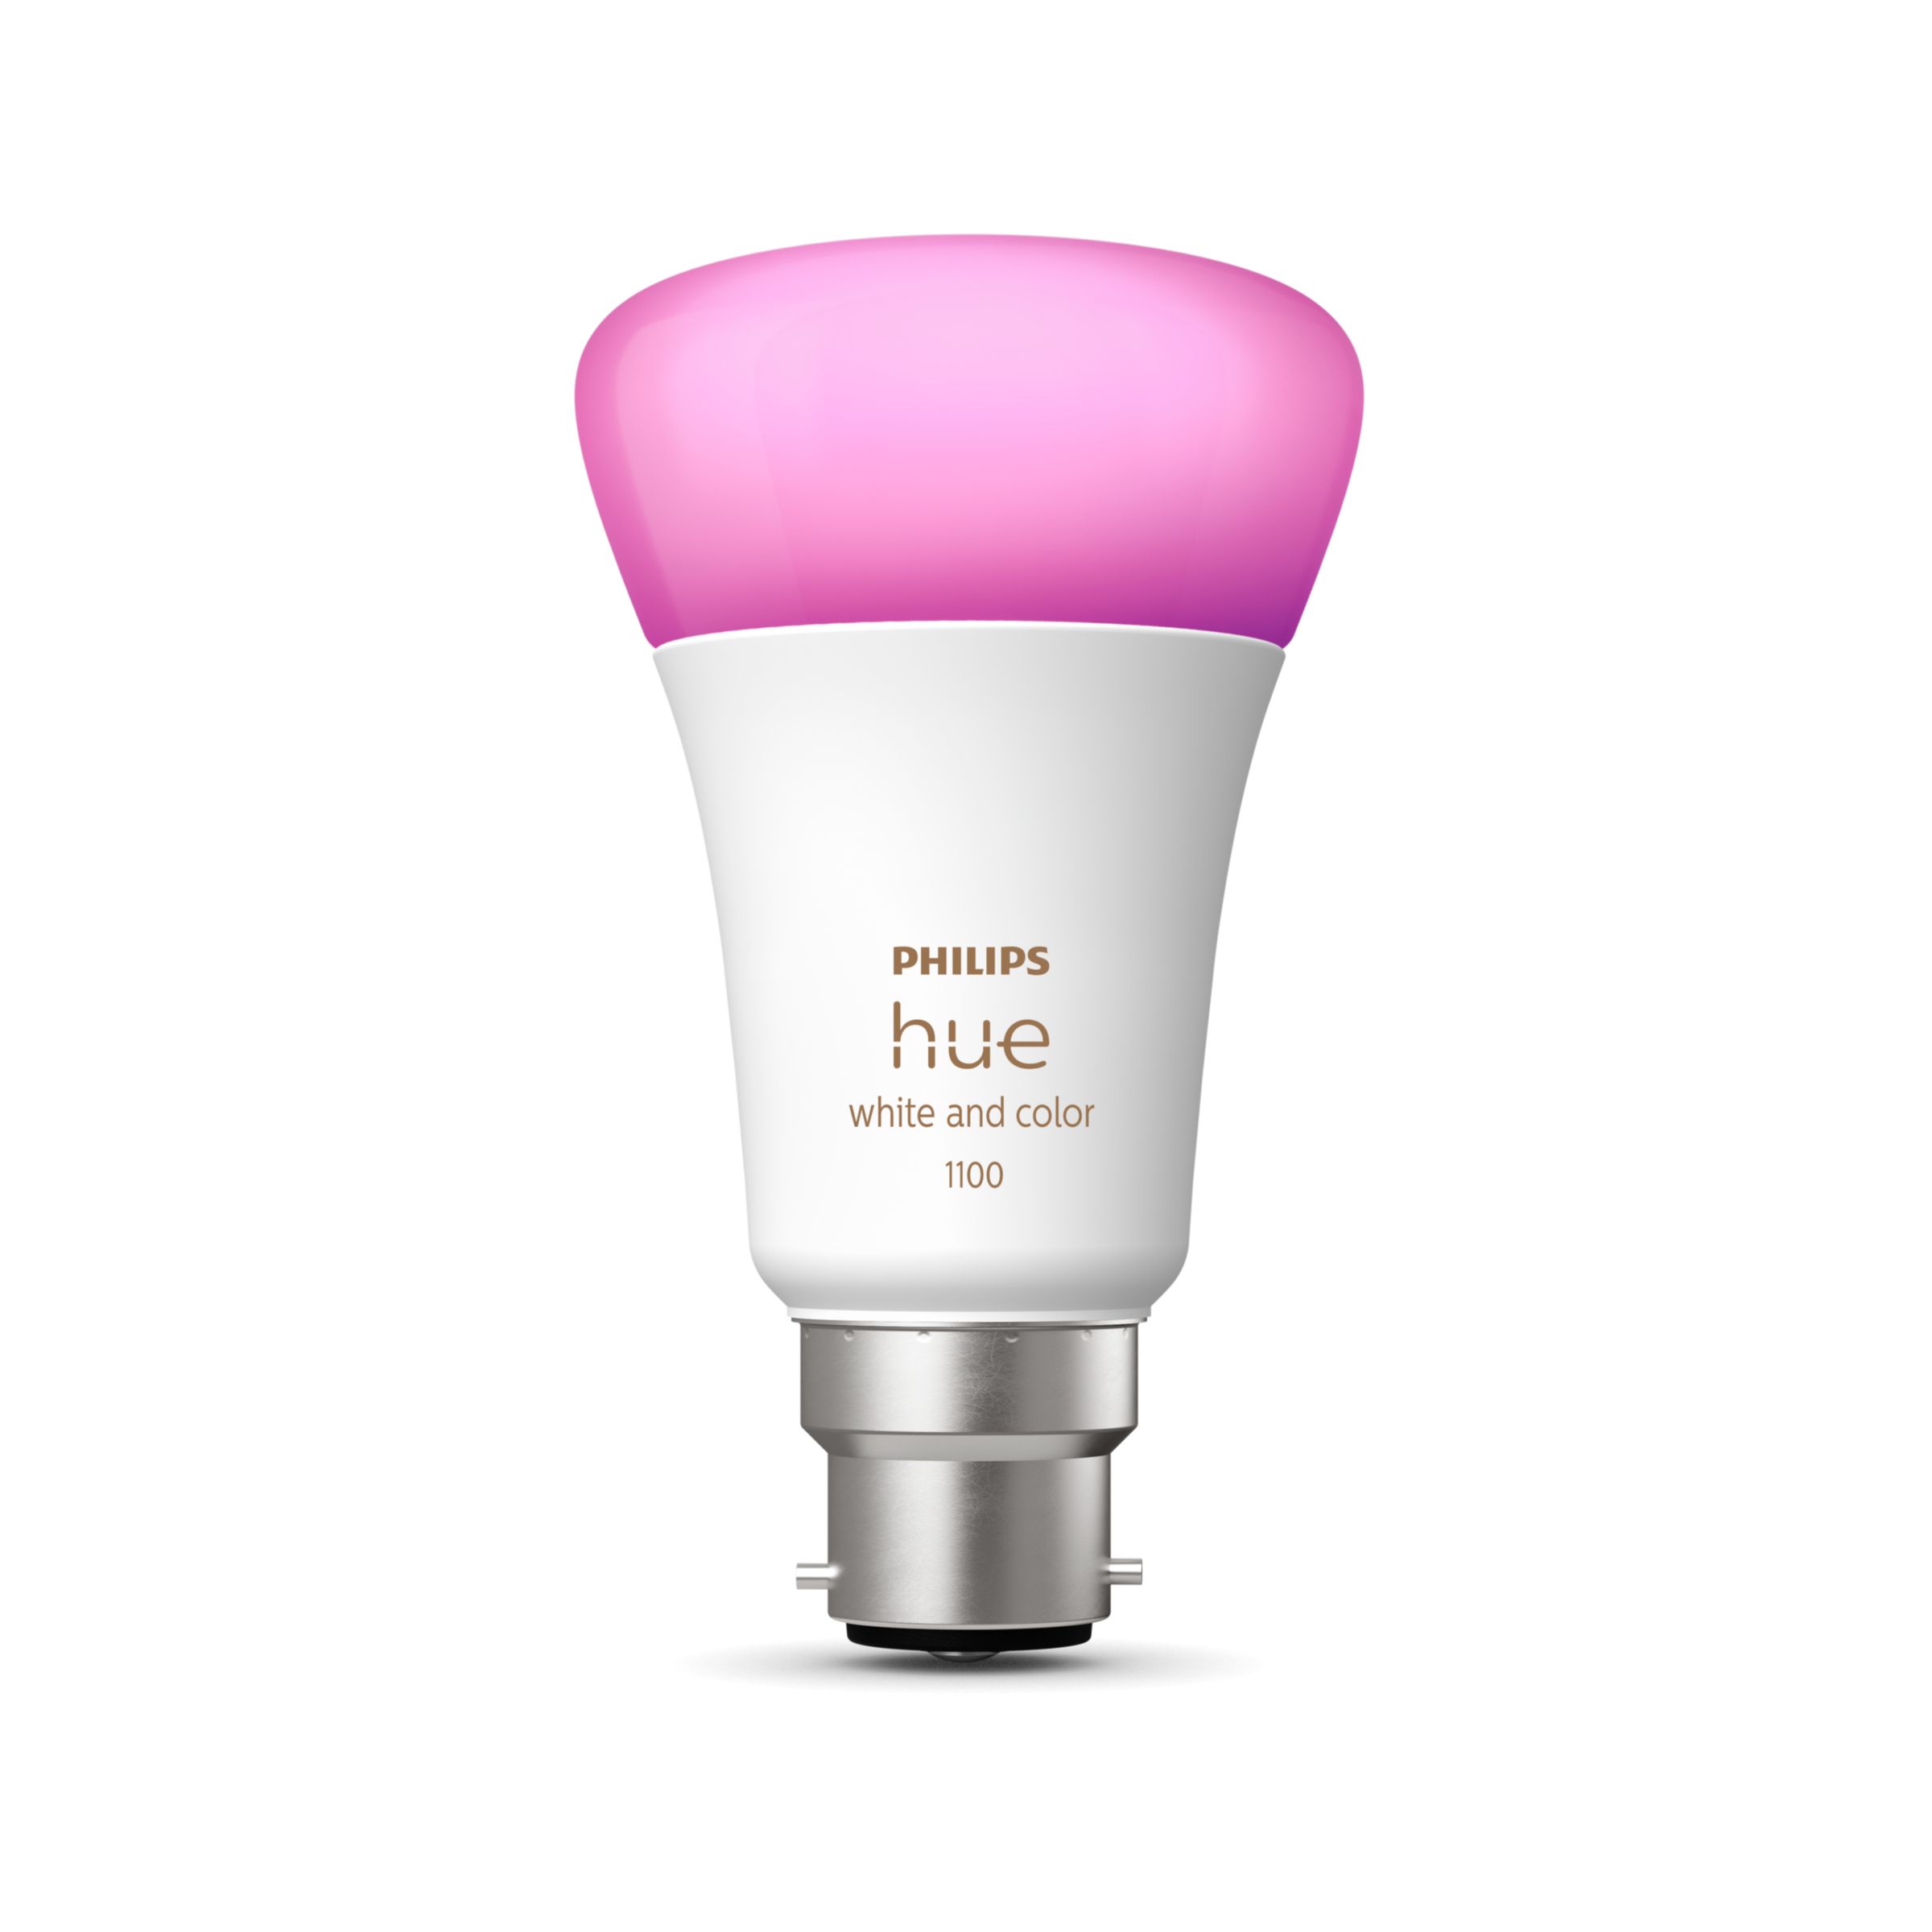 Hue White and color ambiance A60 - B22 smart bulb - 1100 | Philips 